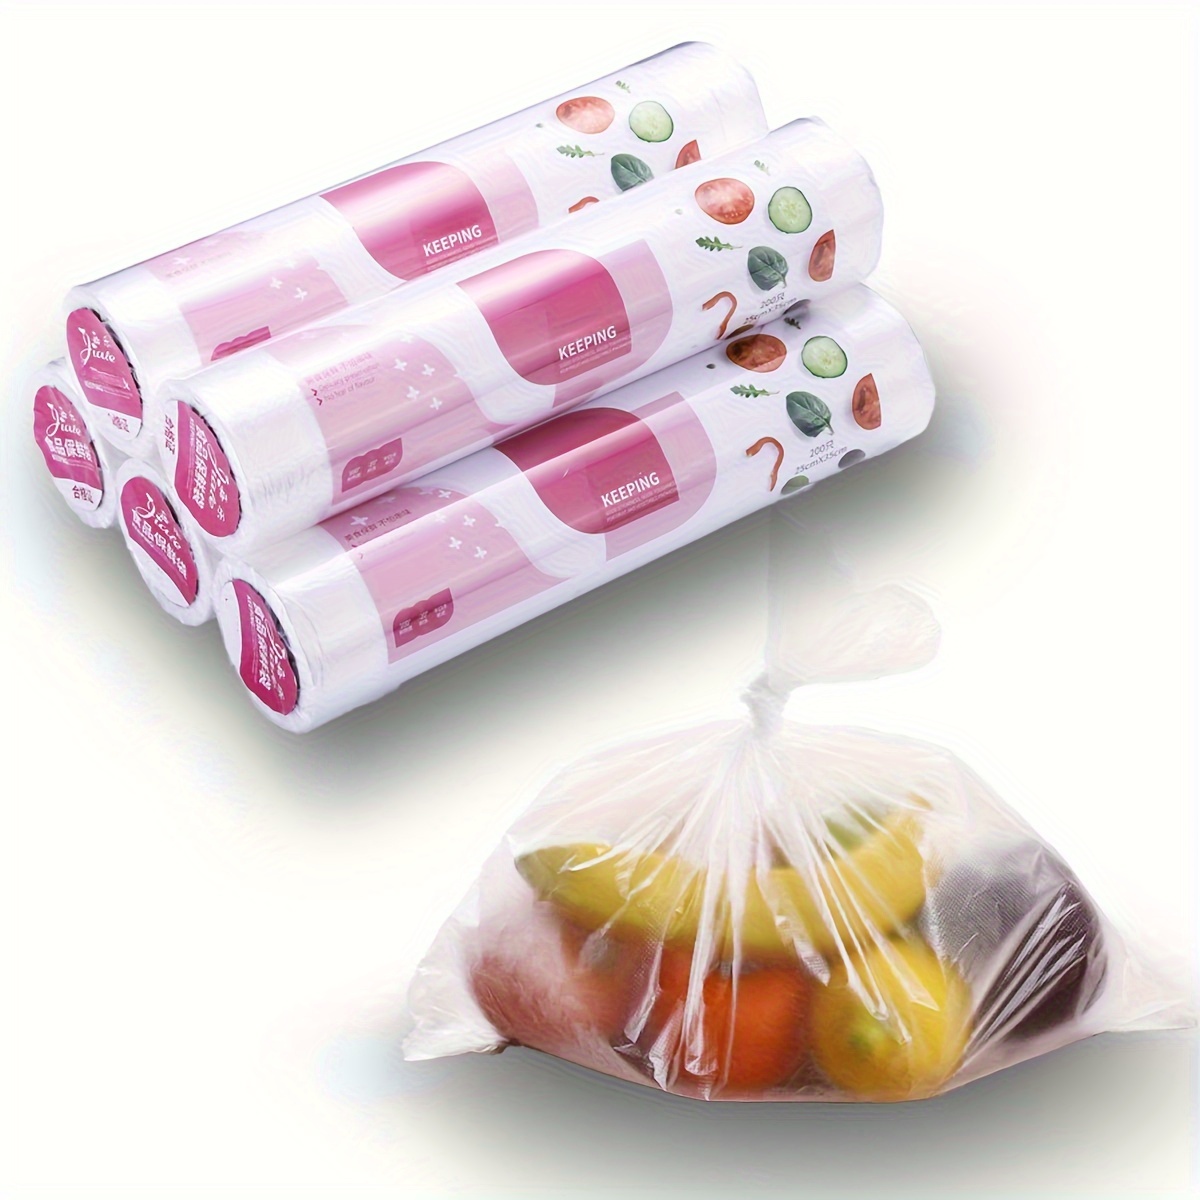 

1 Roll Food Storage Bags, Plastic Produce Bags On A Roll, Fruits, Vegetable, Bread And Grocery Clear Bags, 200/100 Bags Per Roll, Home Room Kitchen Storage Supplies